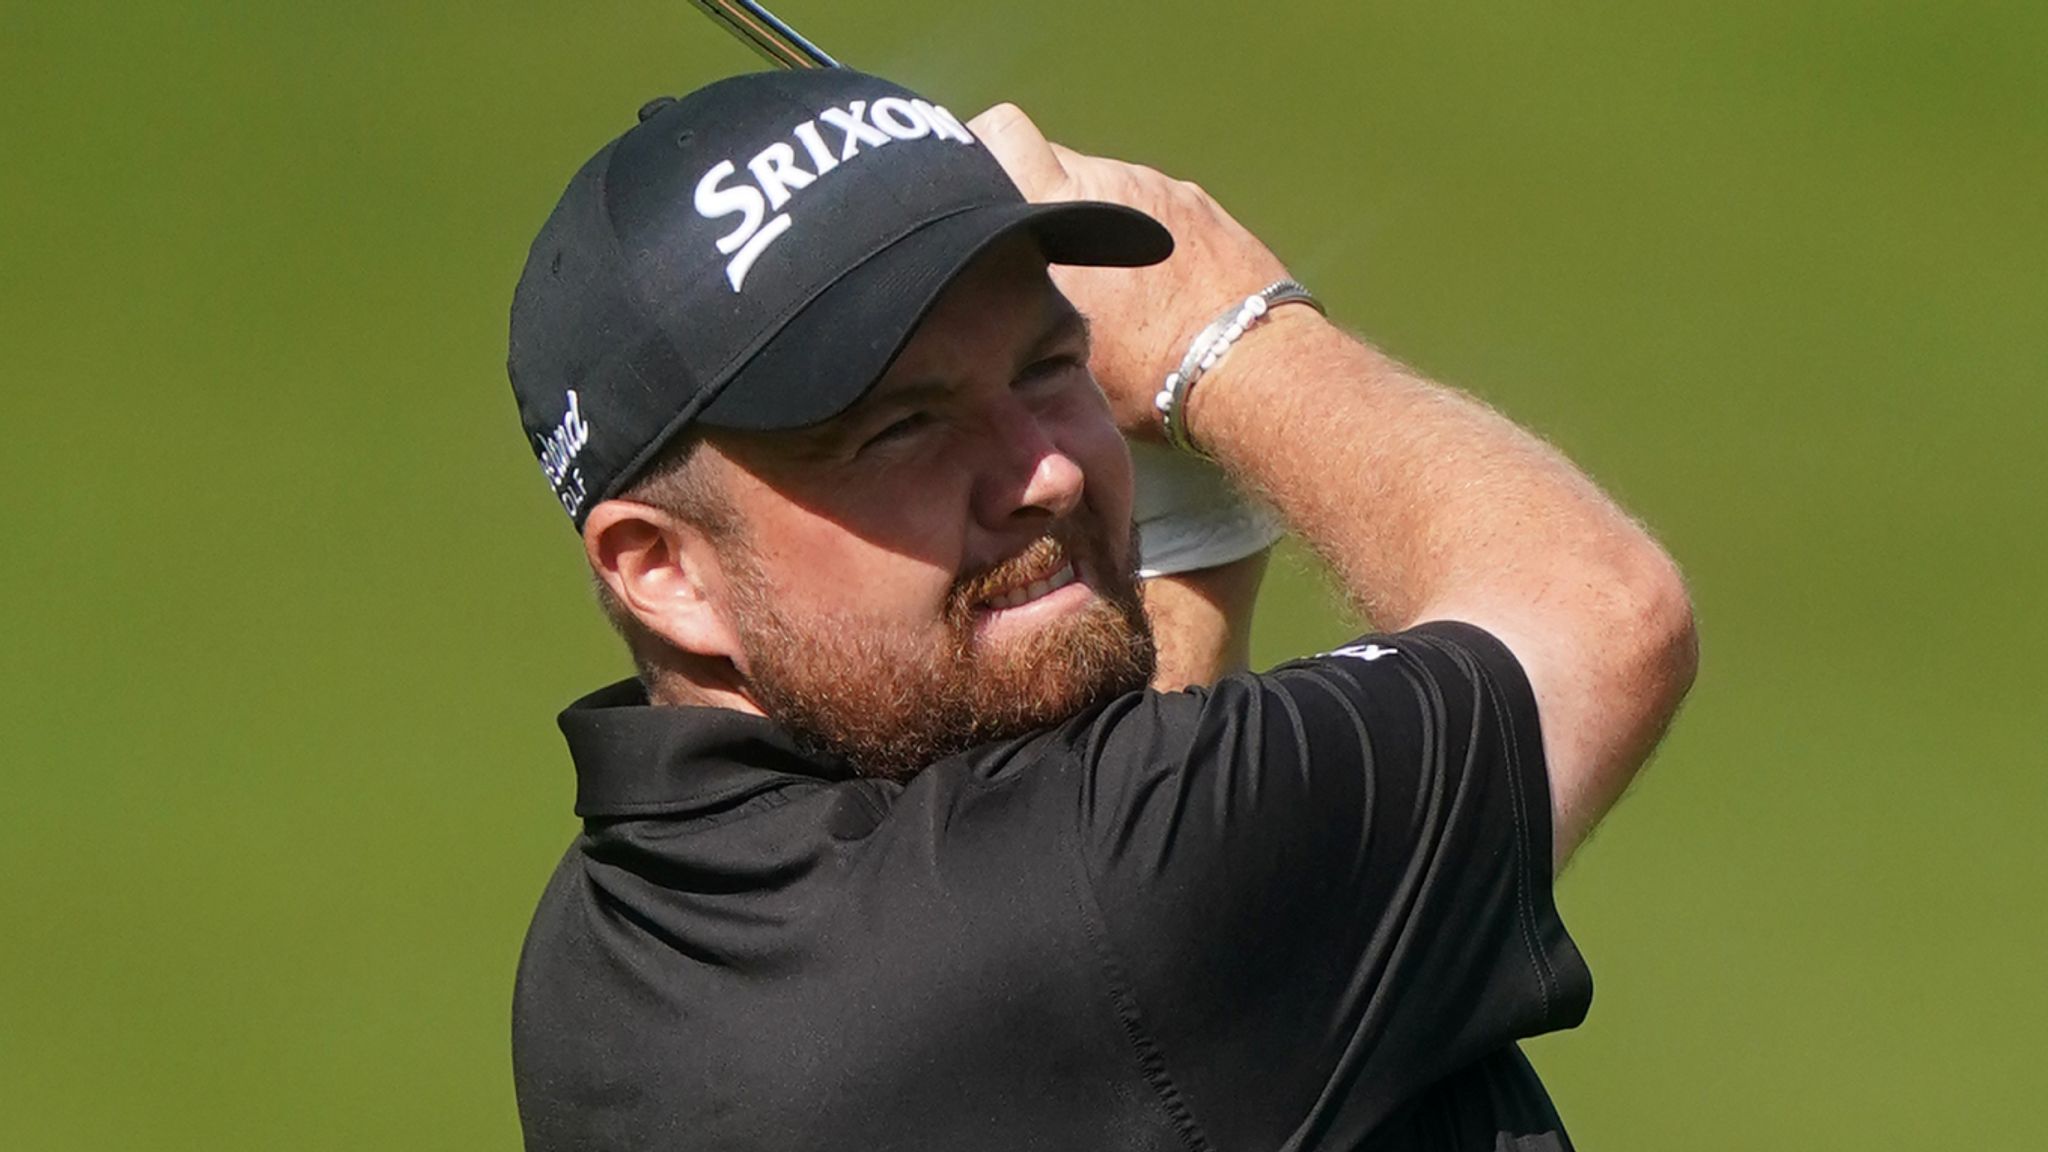 BMW PGA Championship Shane Lowry enjoys win for the good guys with narrow victory at Wentworth Golf News Sky Sports